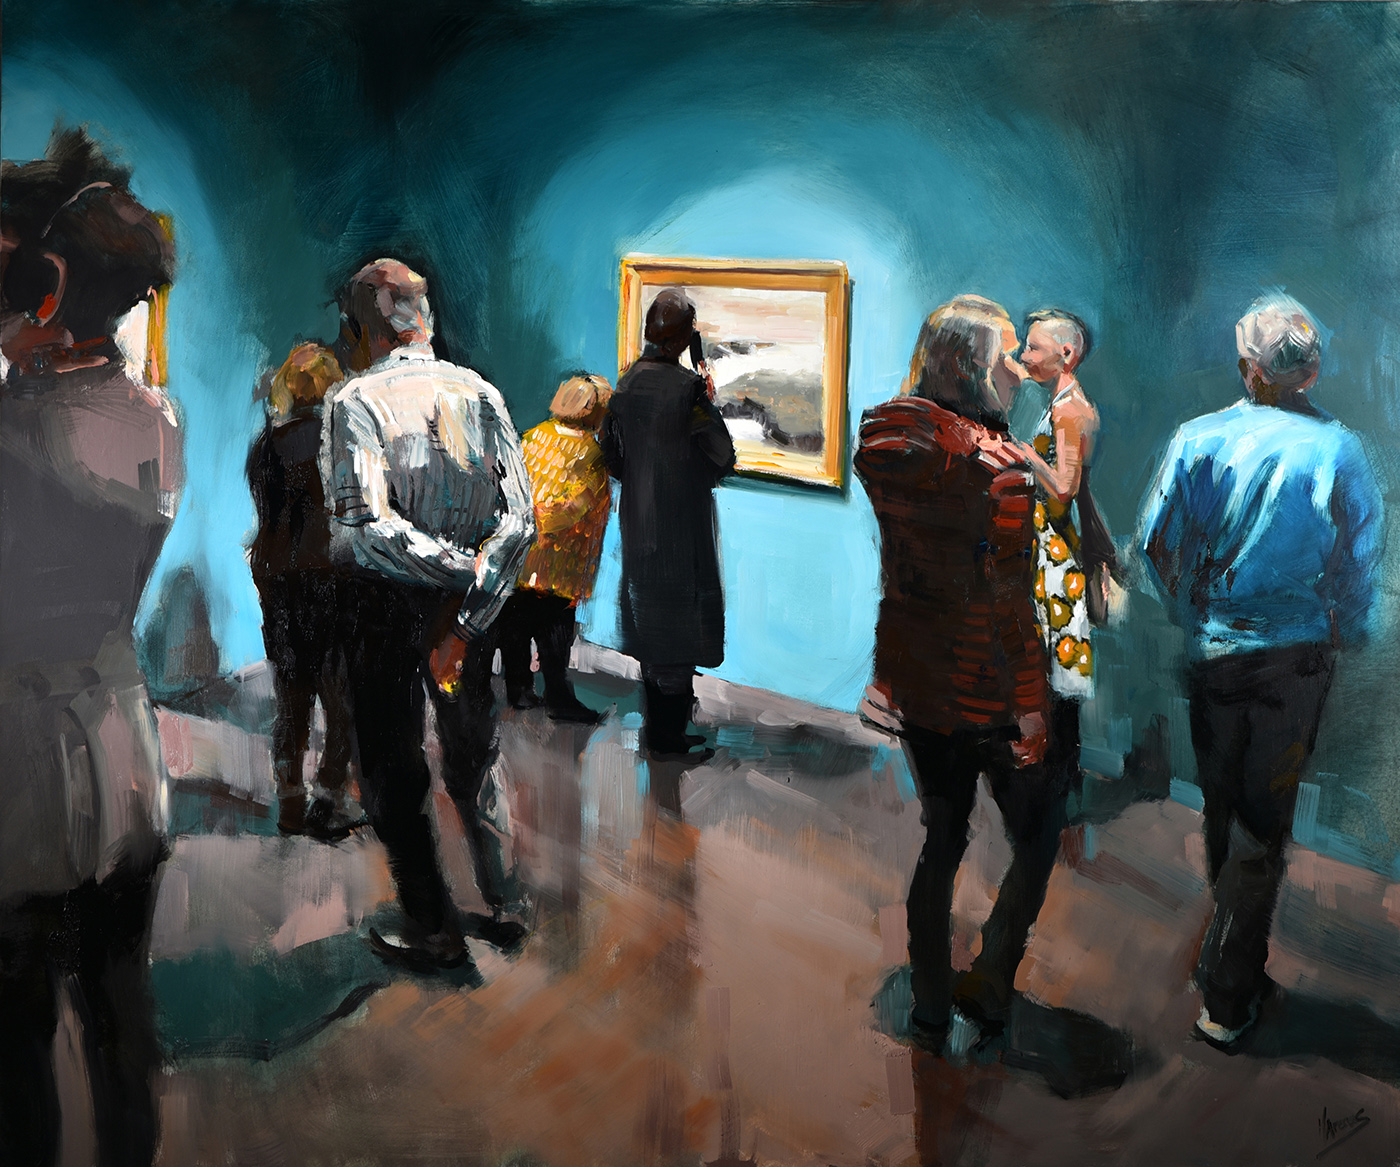 oil painting of people inside a museum looking at the paintings in the dim lit room with blue walls